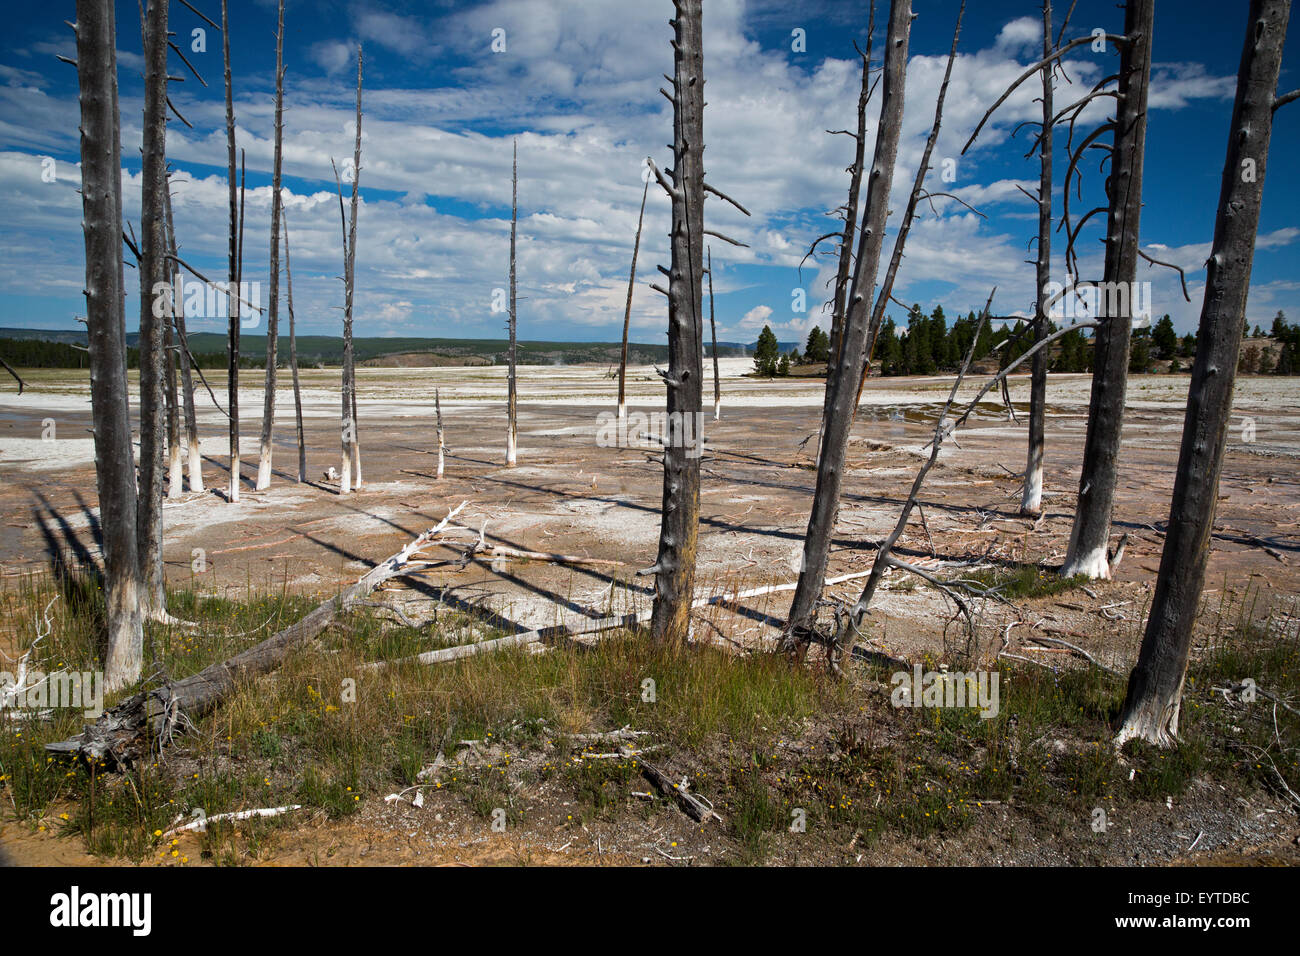 Yellowstone National Park, Wyoming - Dead trees in Yellowstone's Lower Geyser Basin. Stock Photo